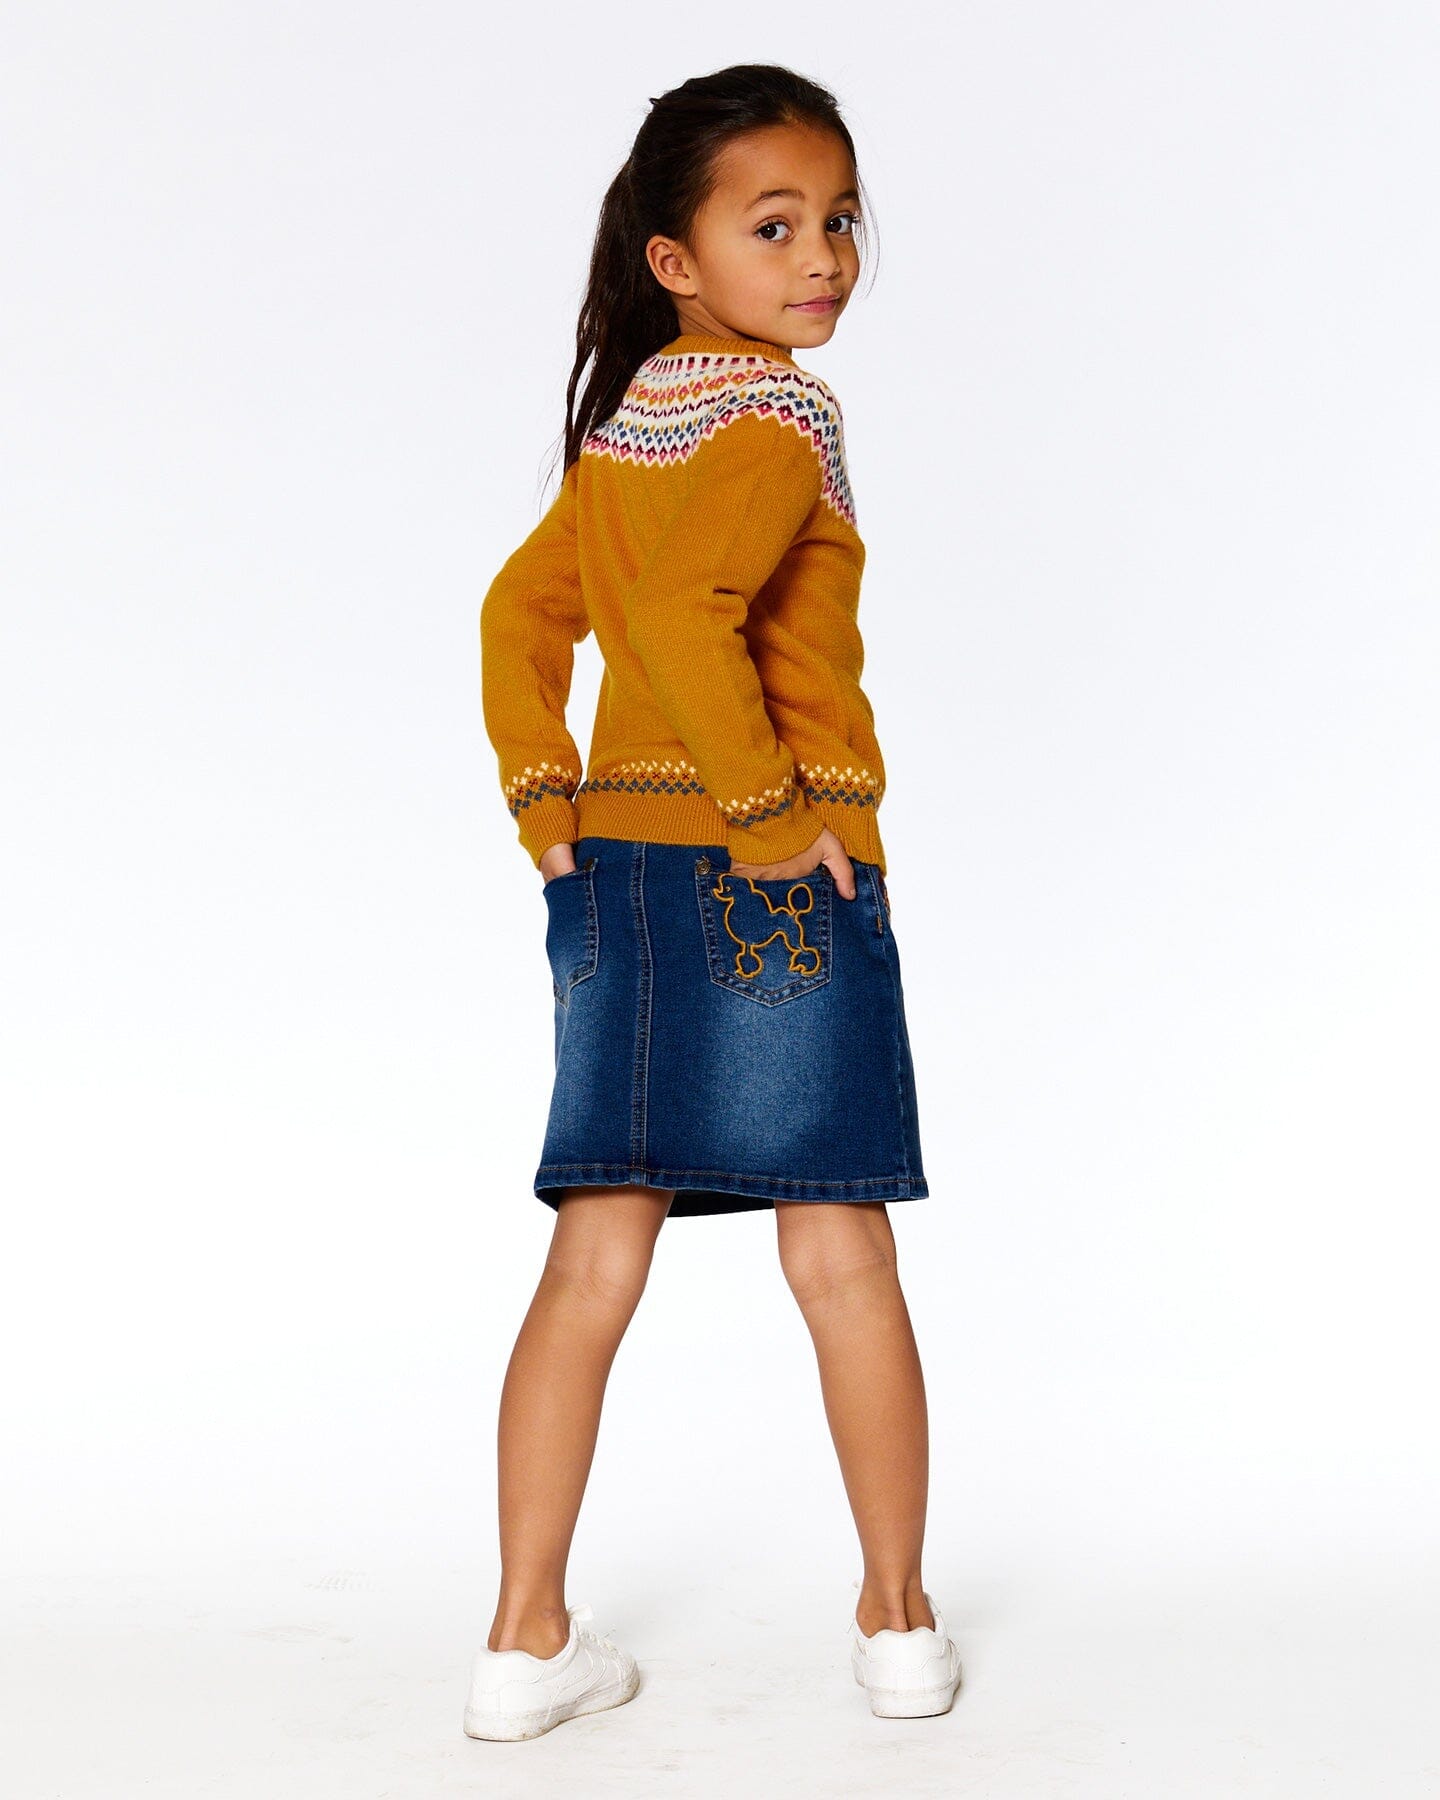 Denim Skirt With Embroidery - F20H80_123